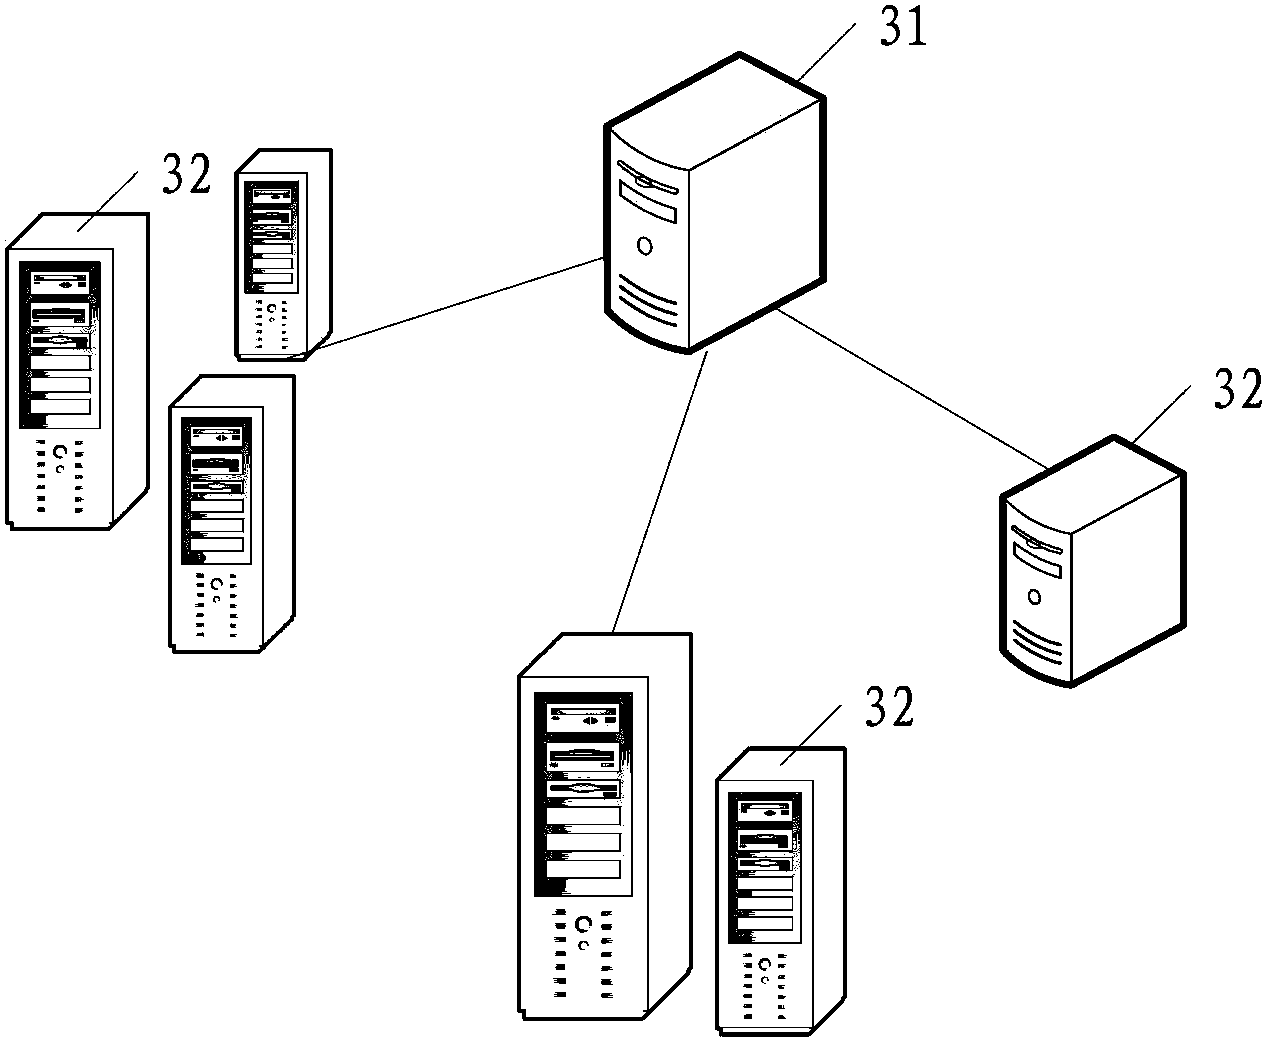 Relational data searching method and device